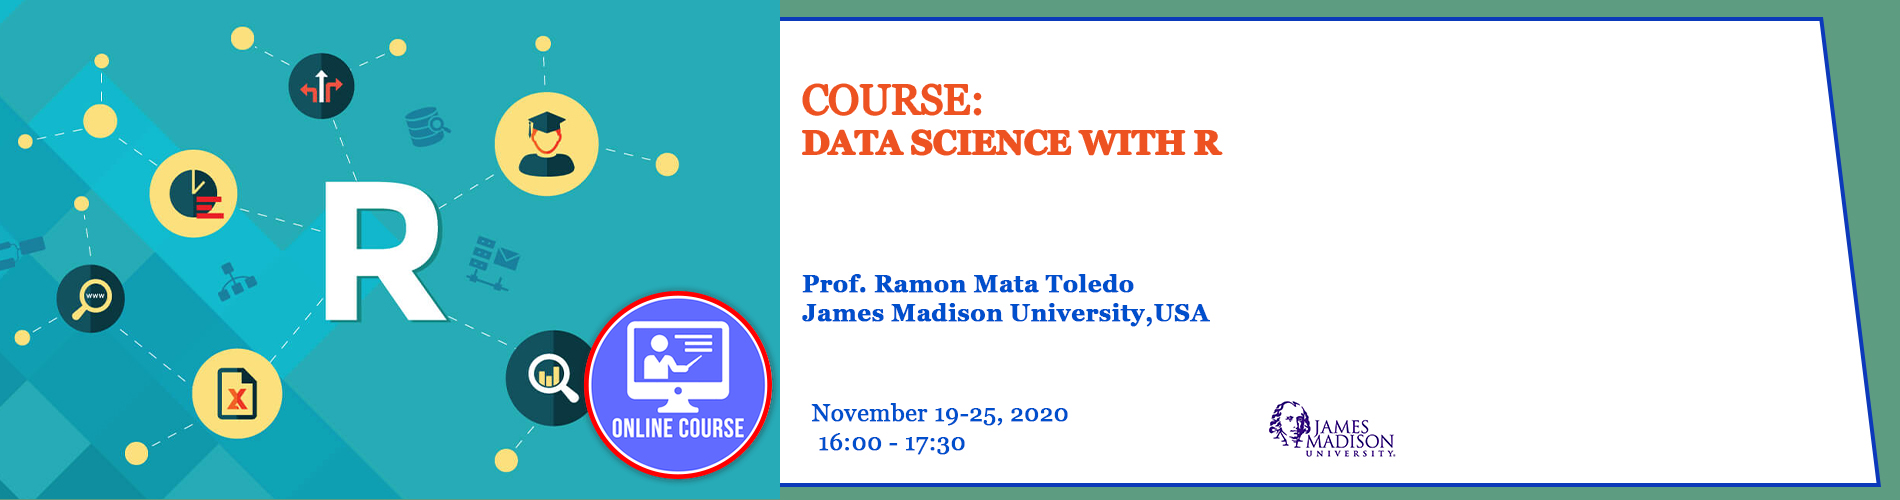 19.11.2020-Data Science with R